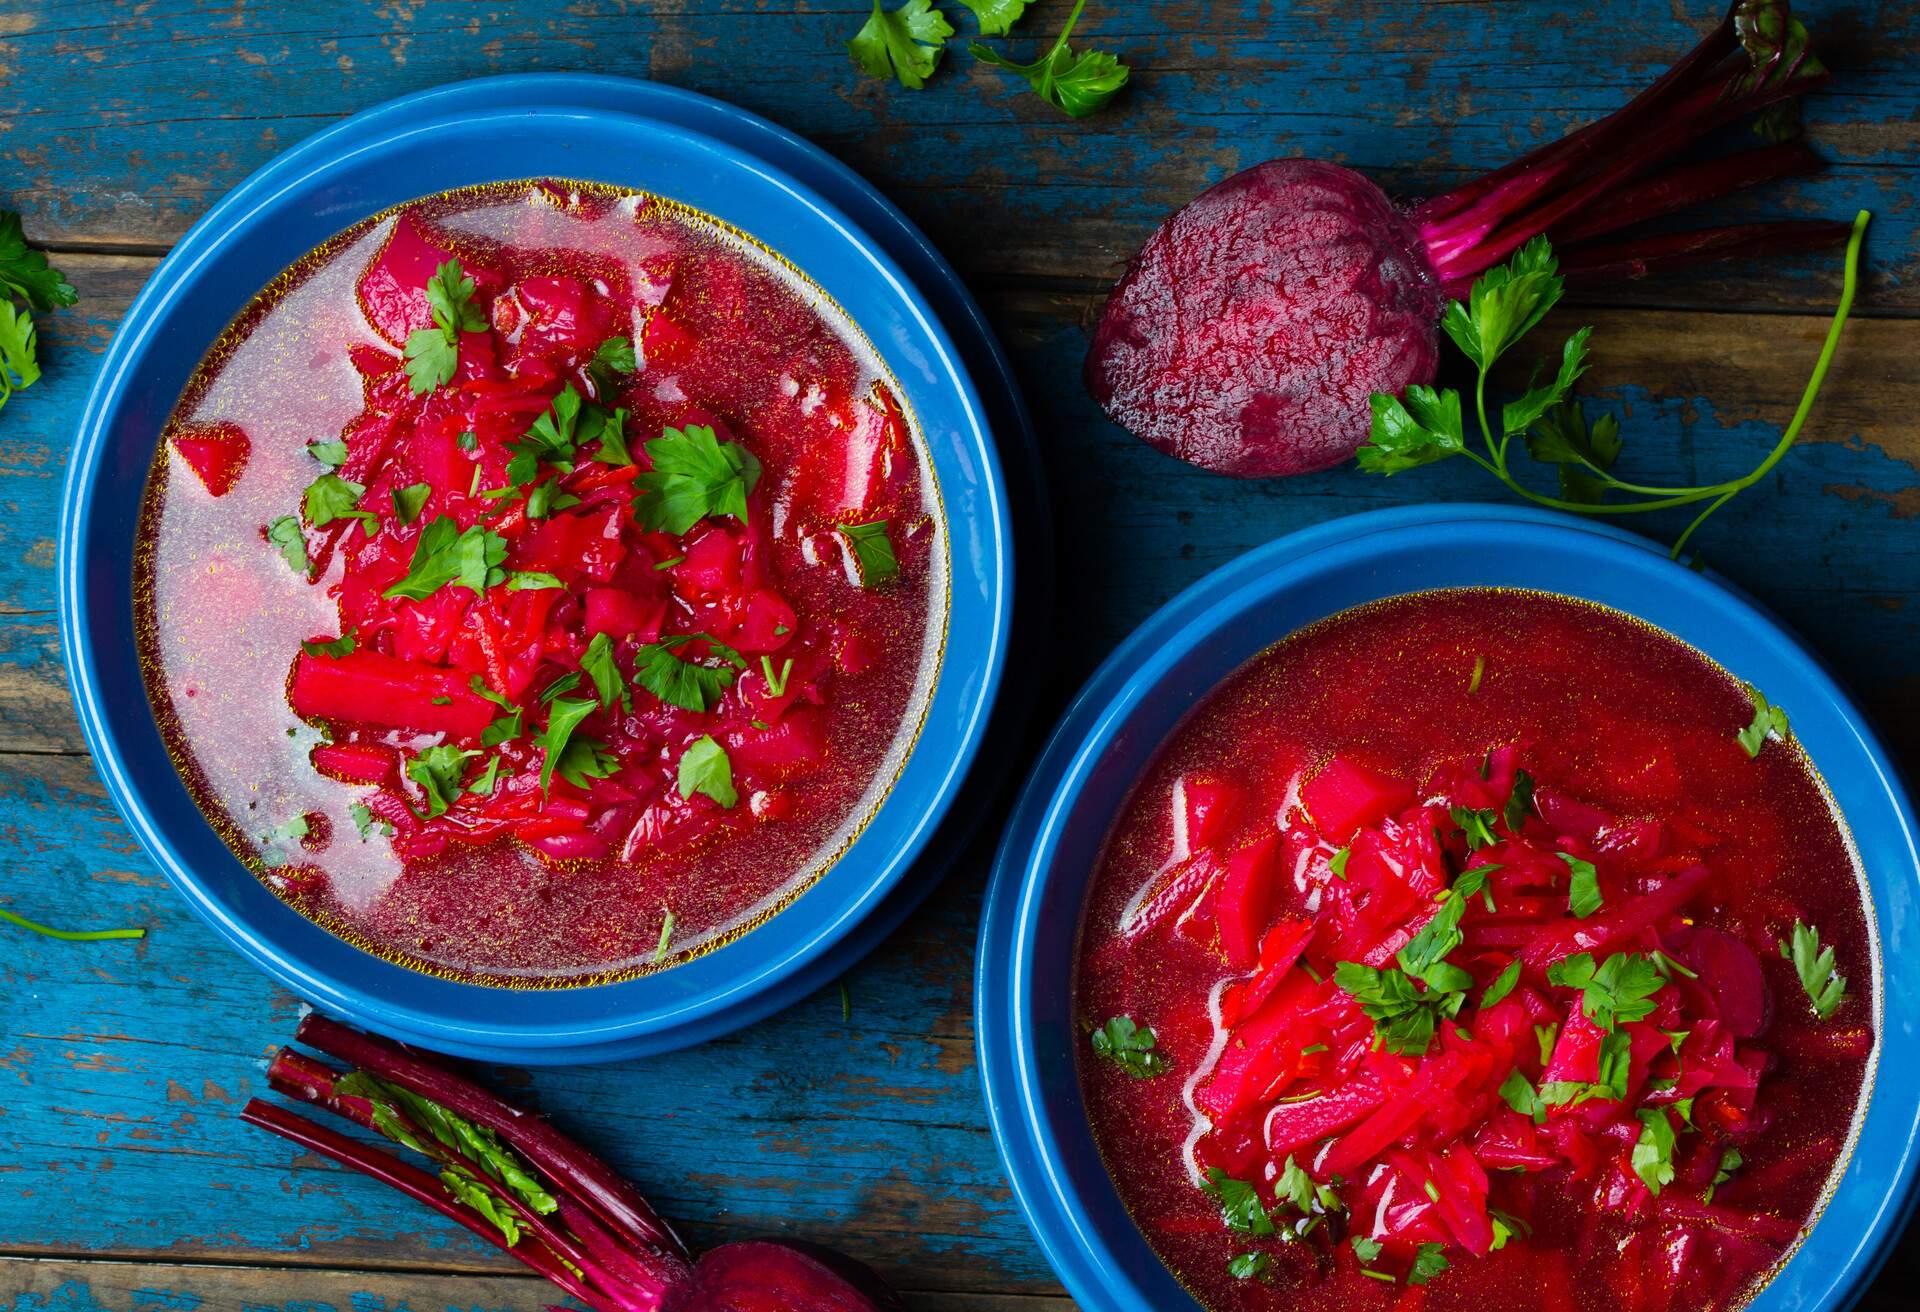 Russian and Ucrainian traditional vegetarian red soup - borsch in blue plates on wooden background. Top view